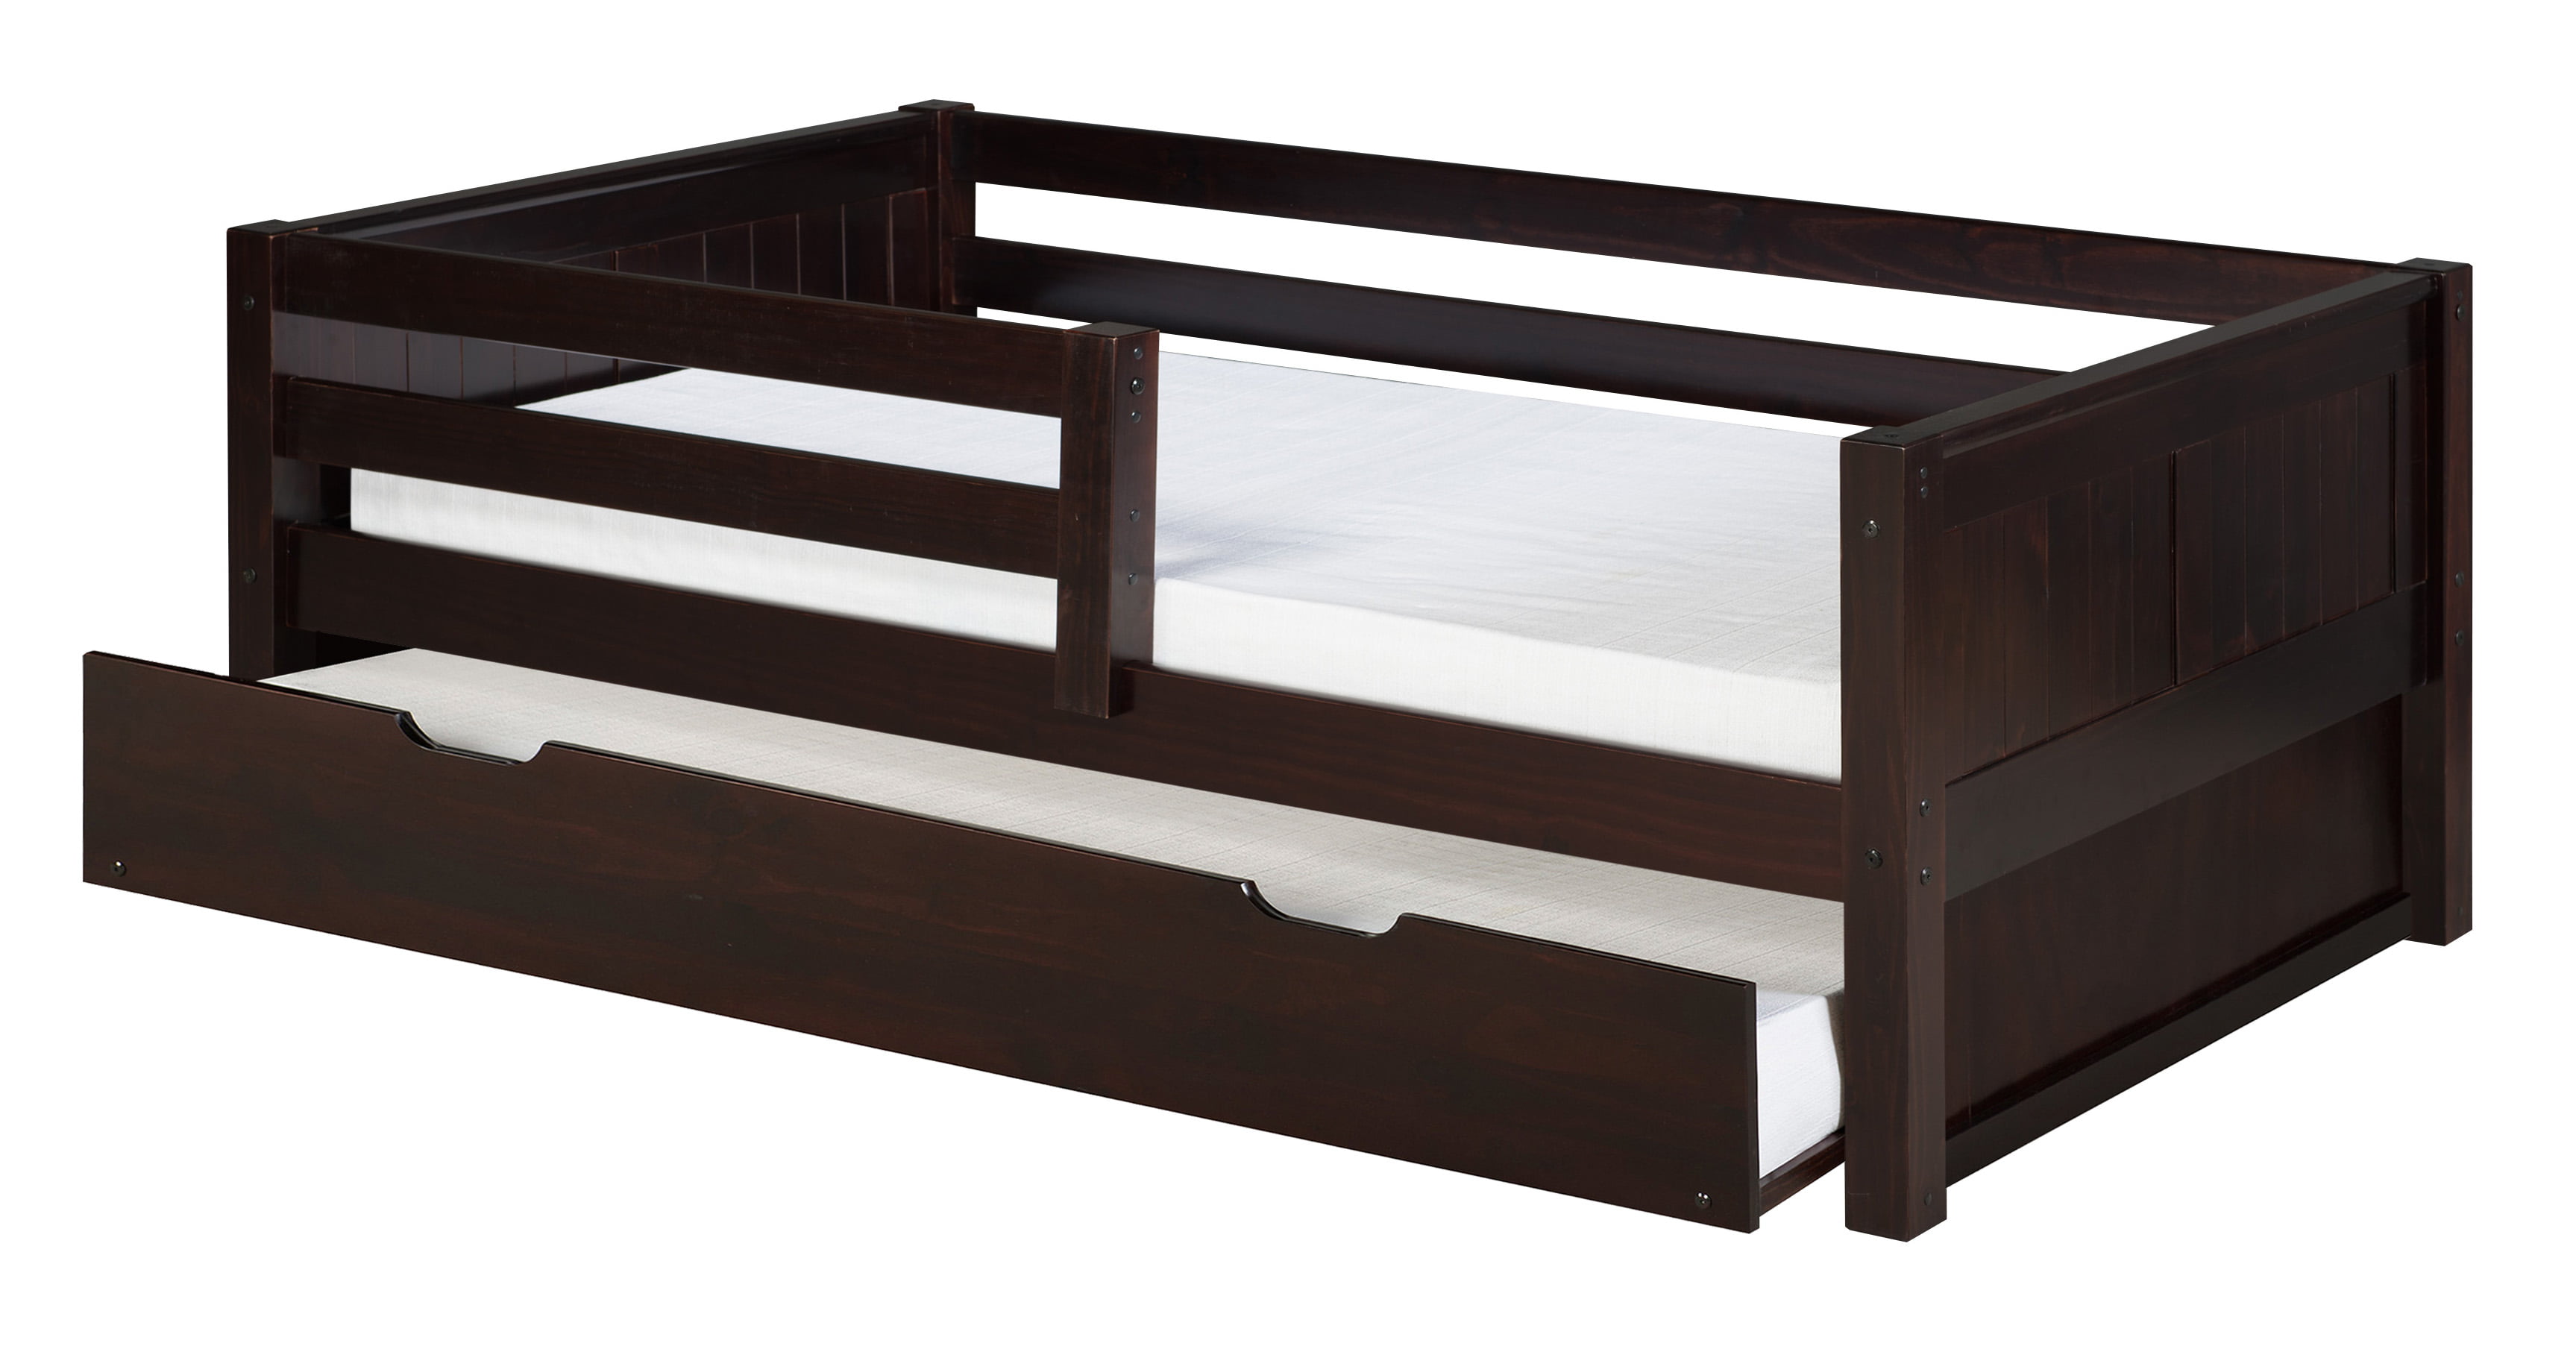 Twin Bed With Rails All Around, Twin Bed With Rails All Around